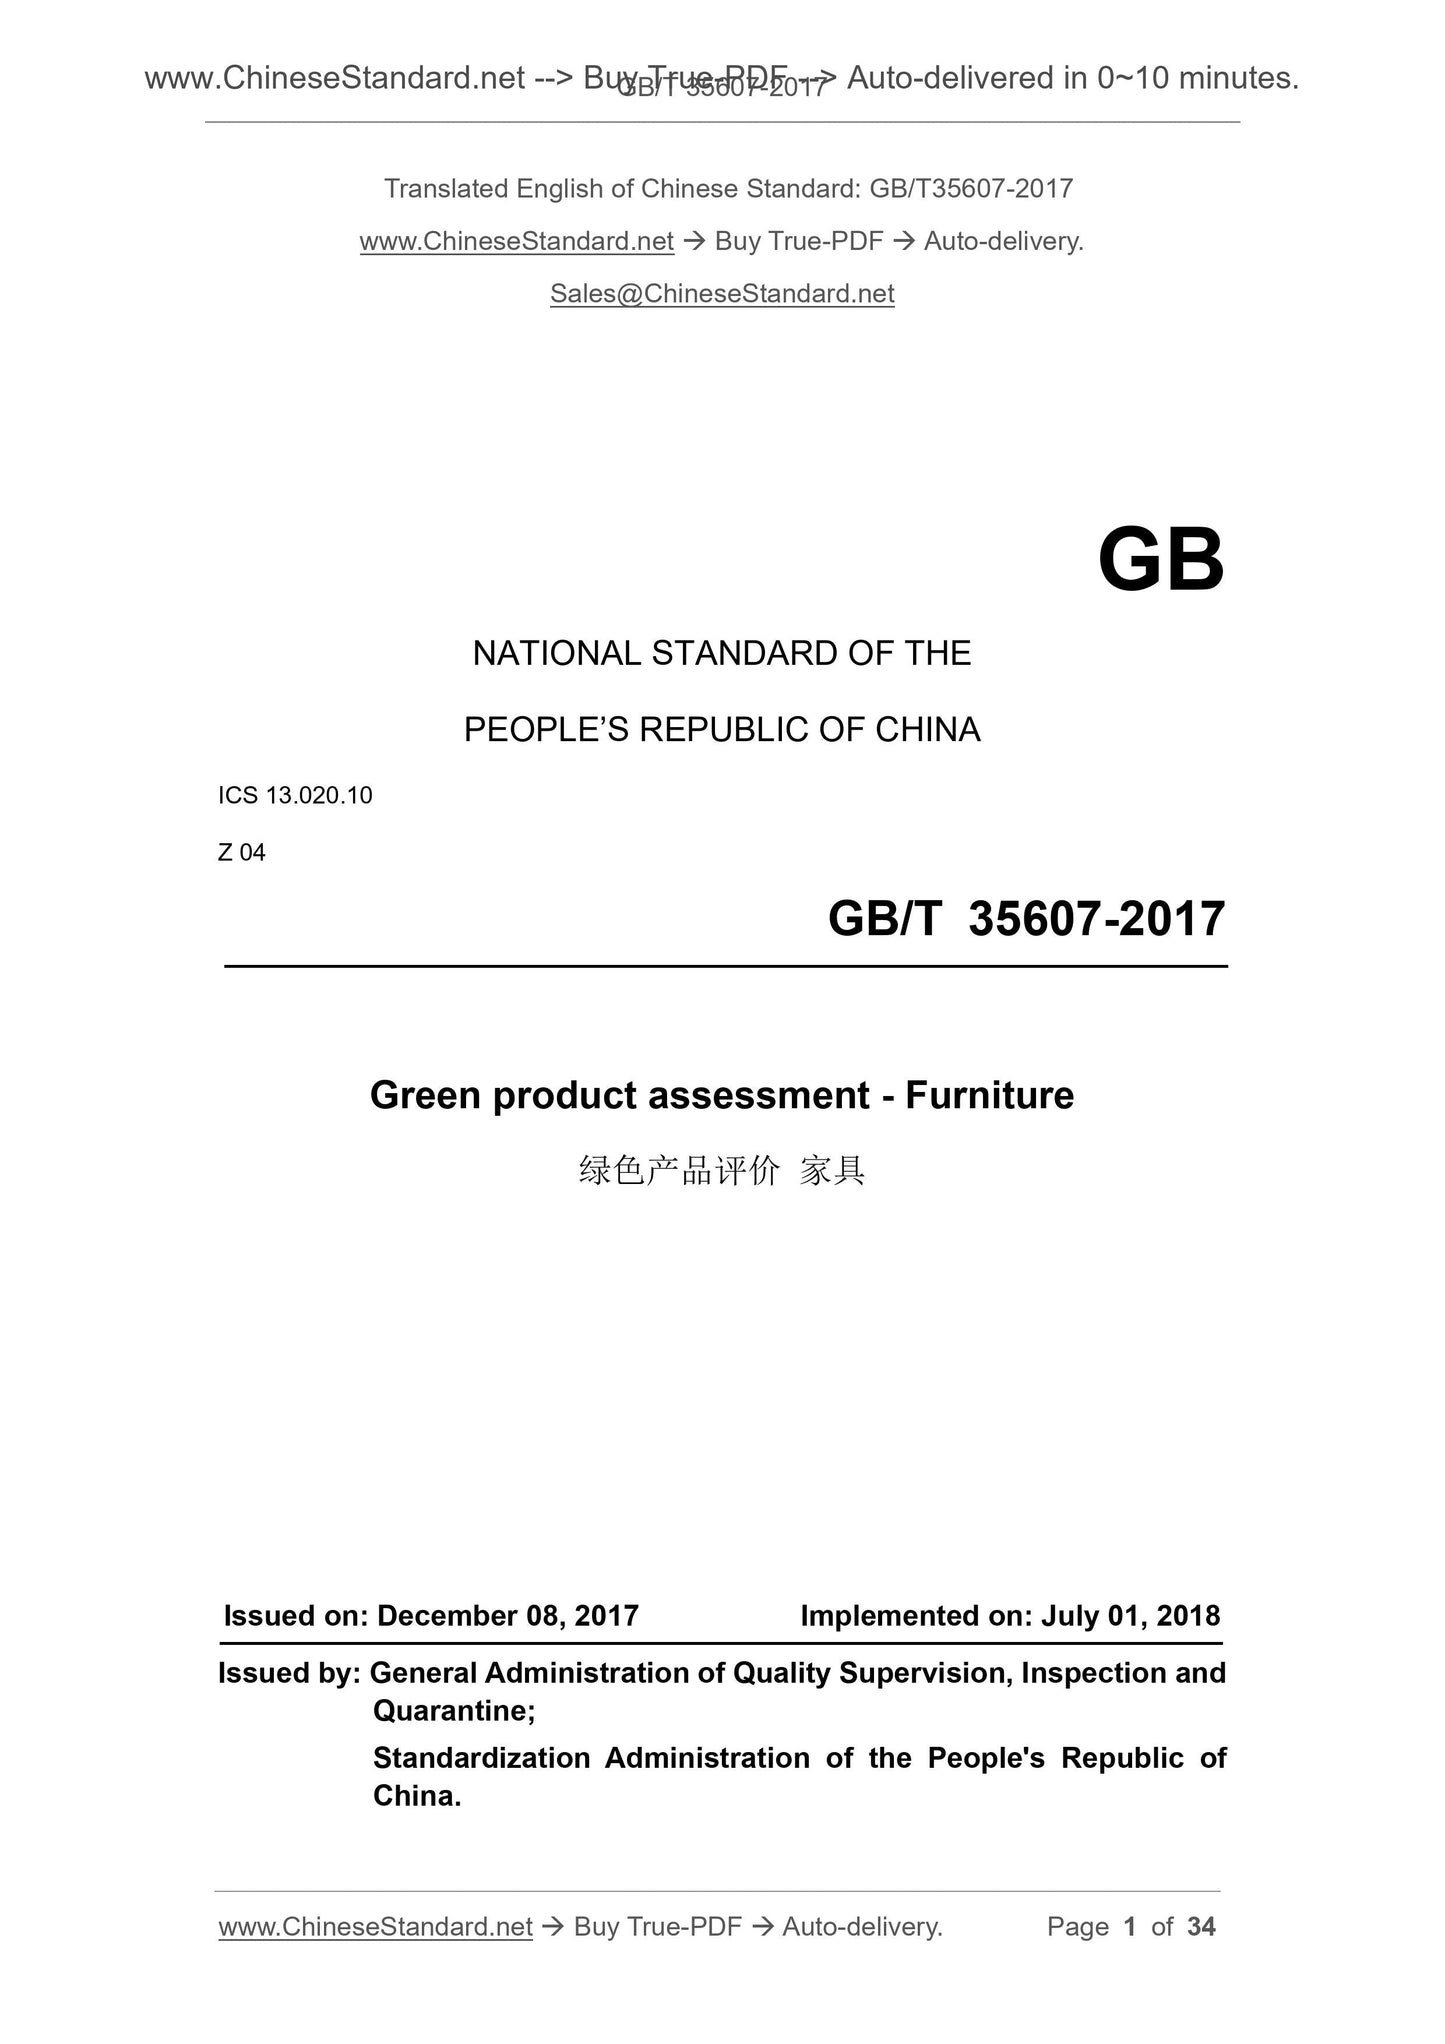 GB/T 35607-2017 Page 1